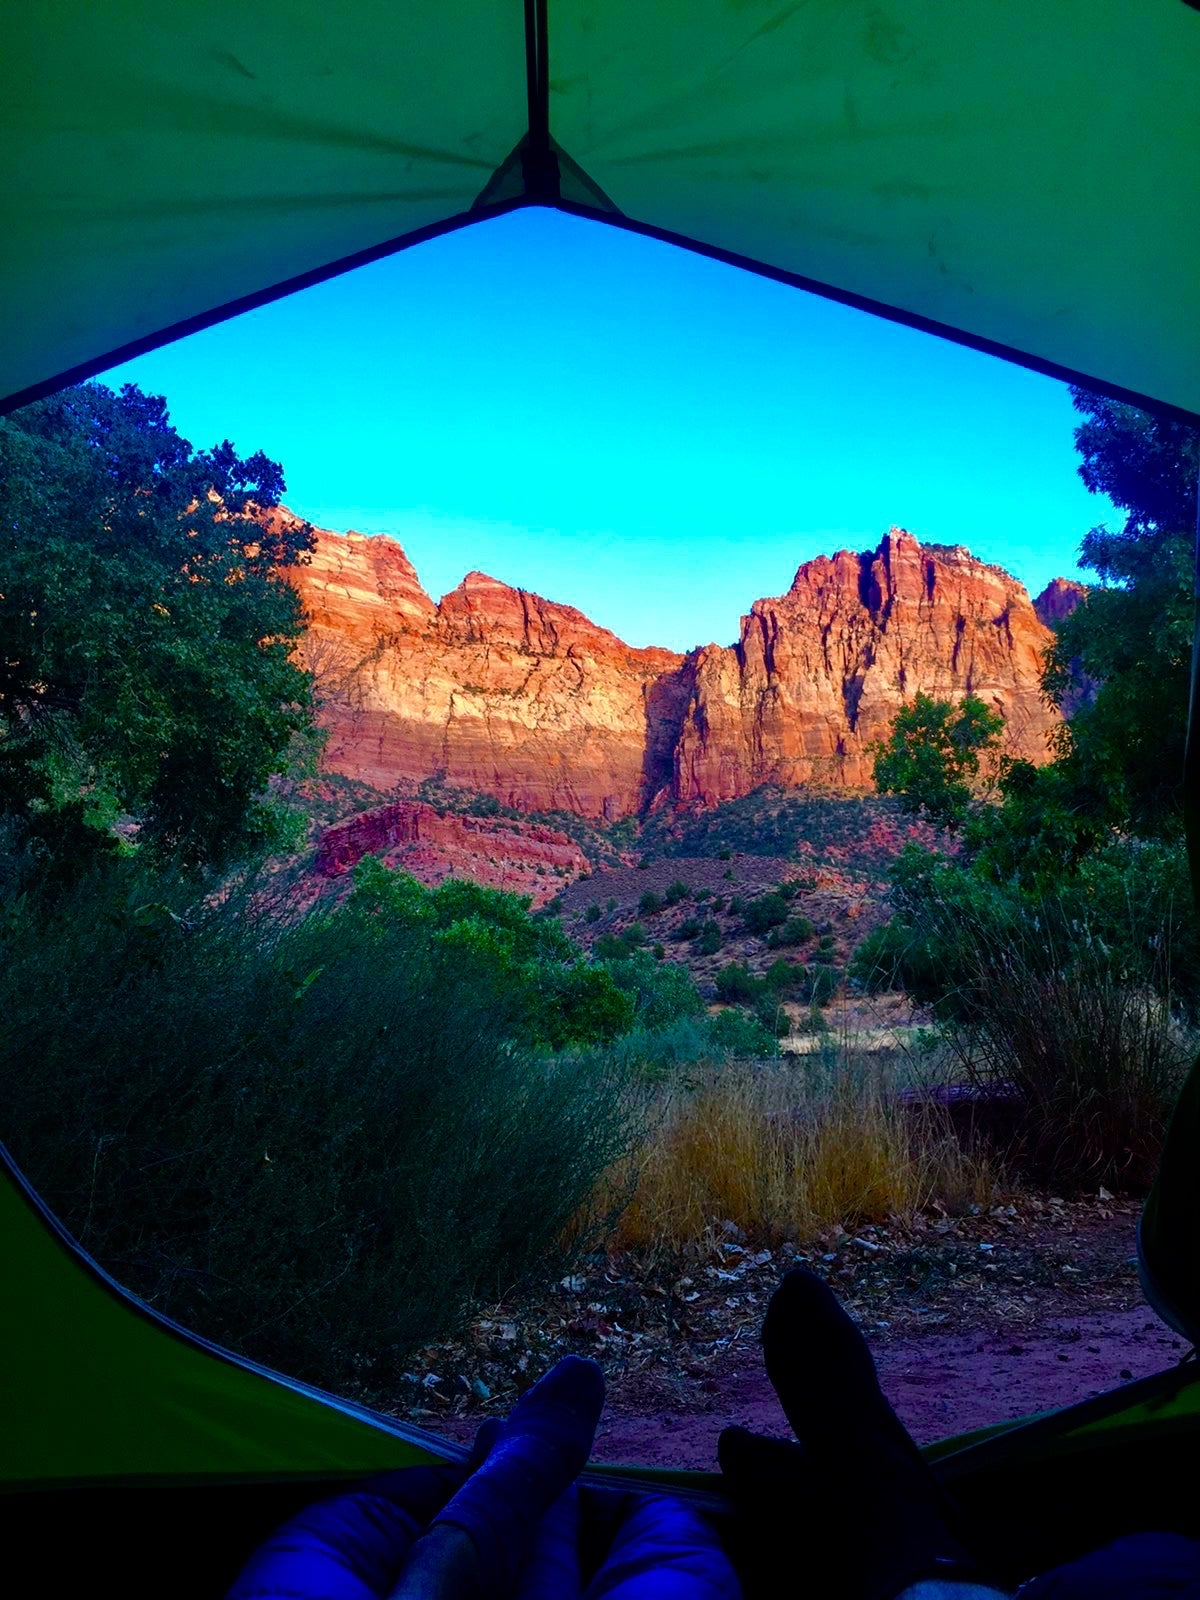 View from the tent.